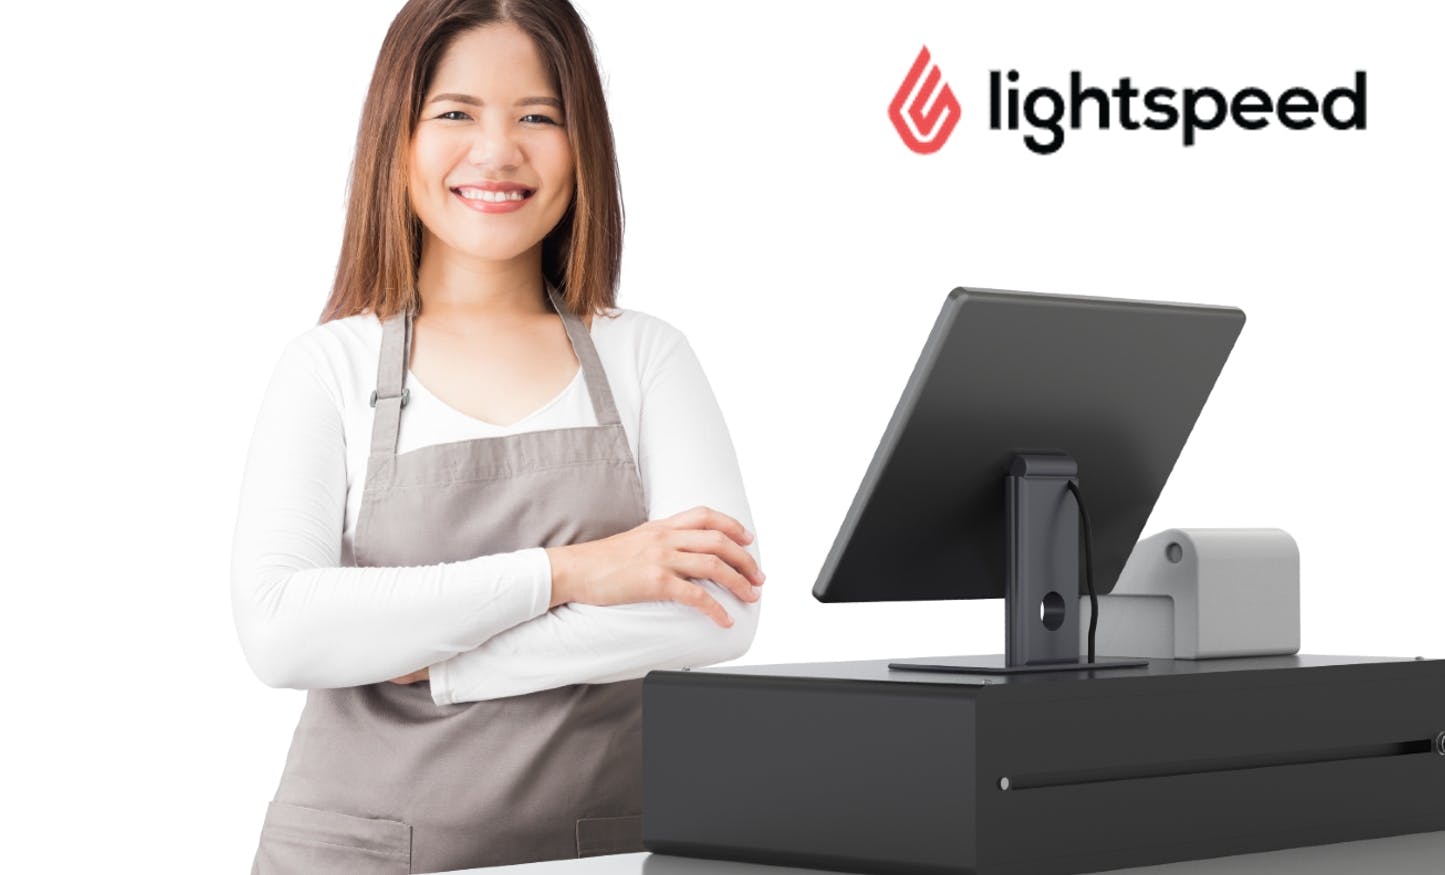 Lightspeed: Exceptional POS Features